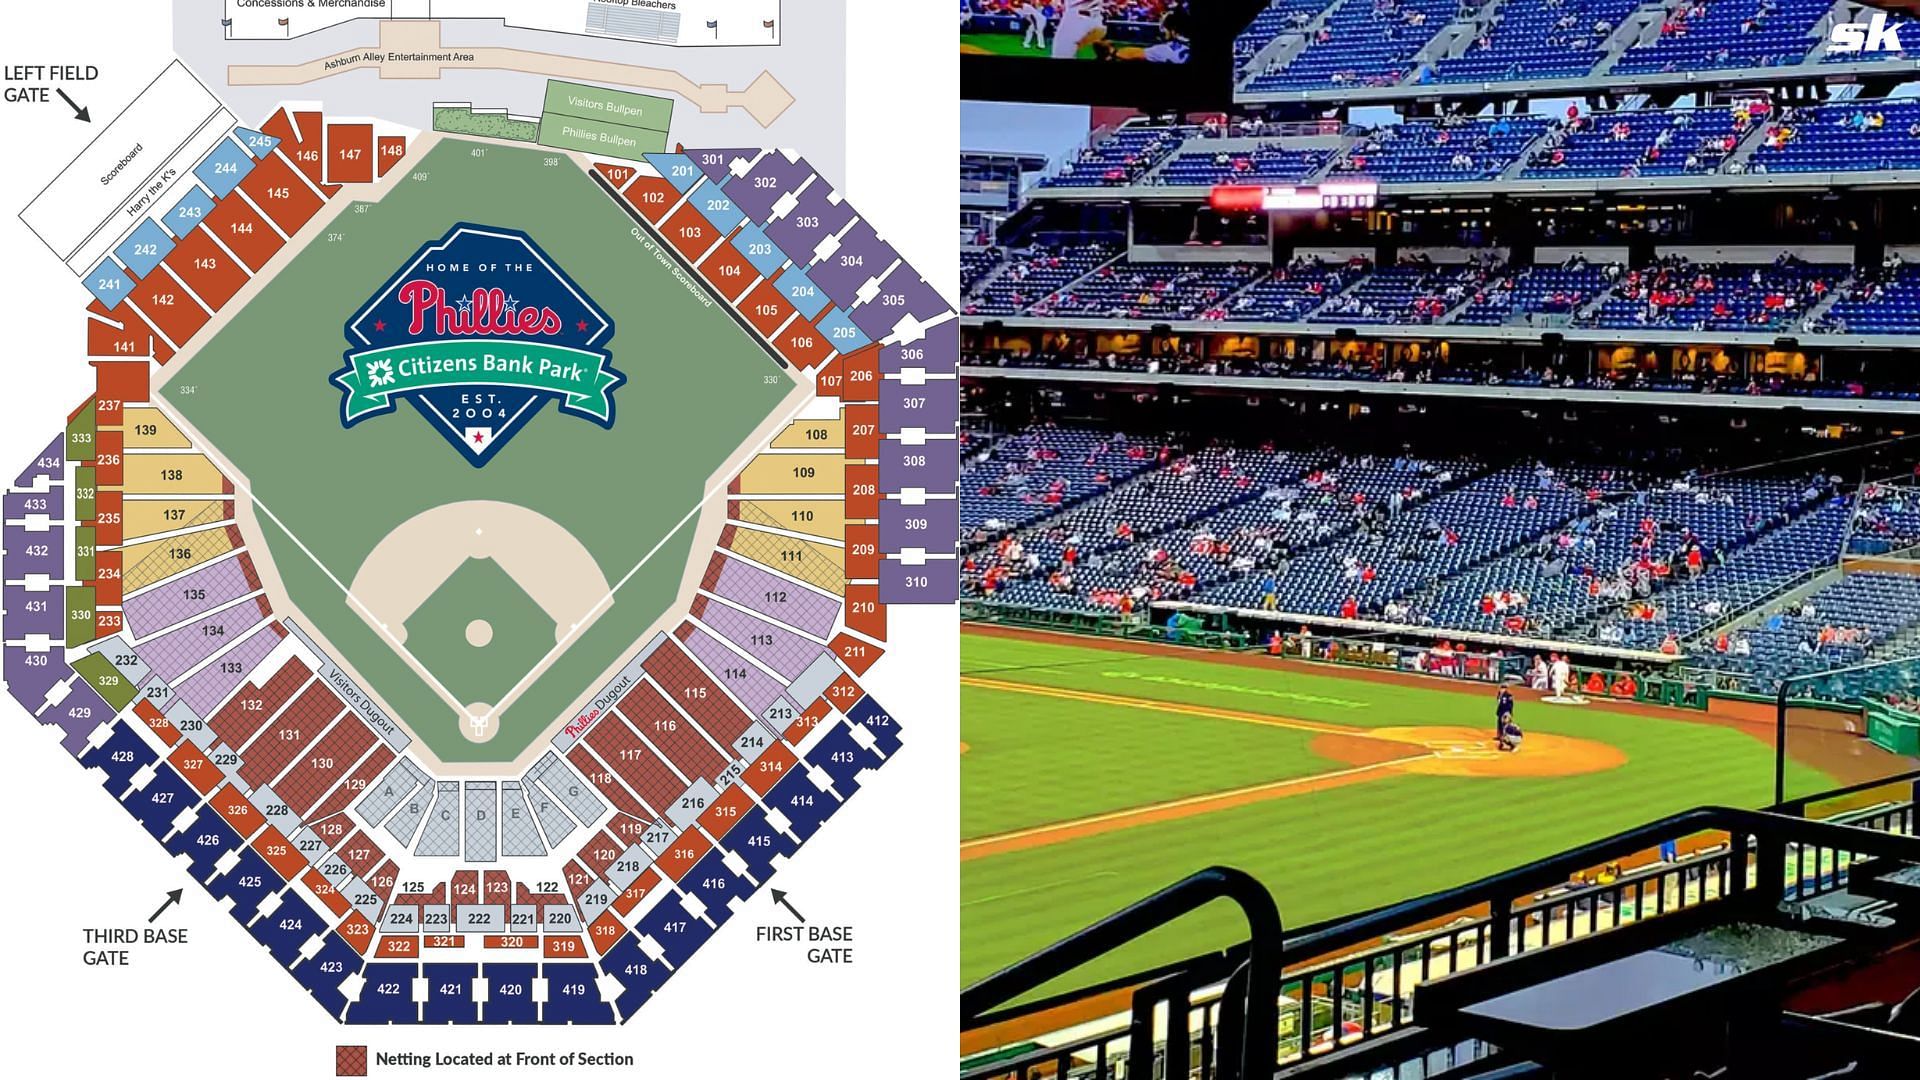 Seating Map and the view from the premium seats inside the Citizens Bank Park